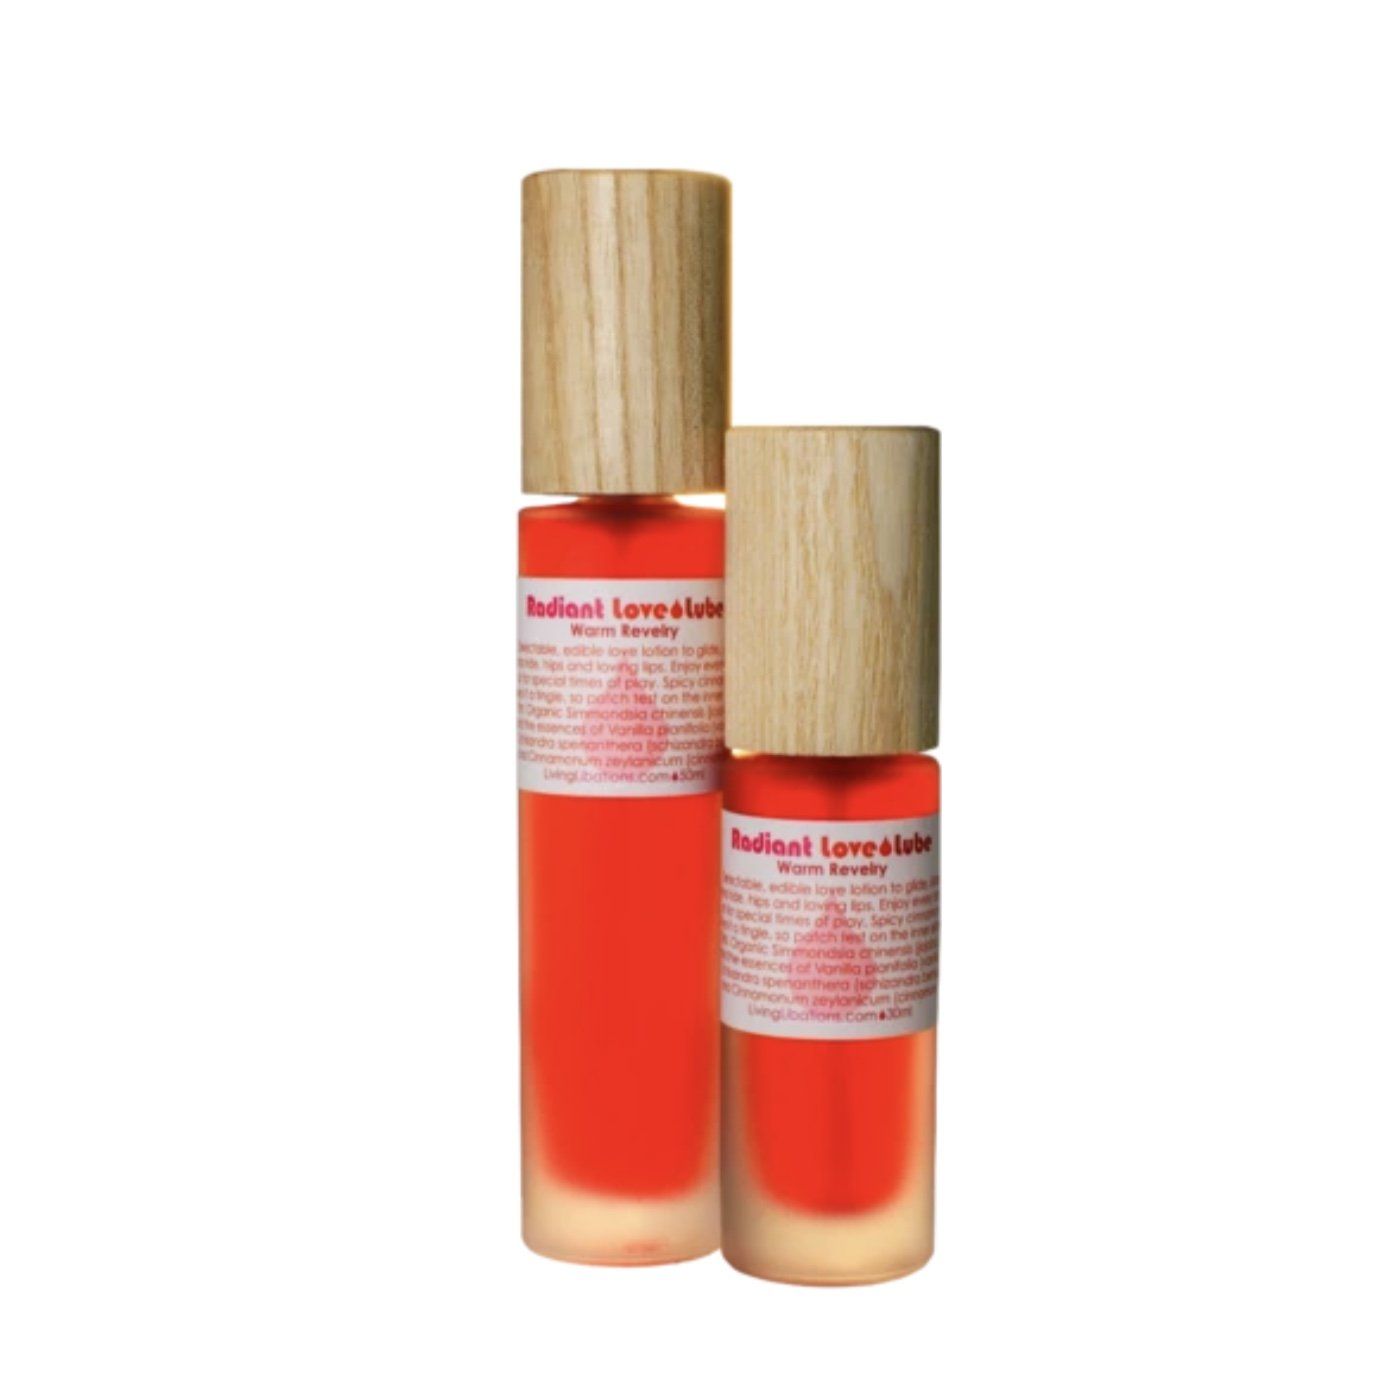 Radiant Love Lube by Living Libations Wellness Living Libations Prettycleanshop